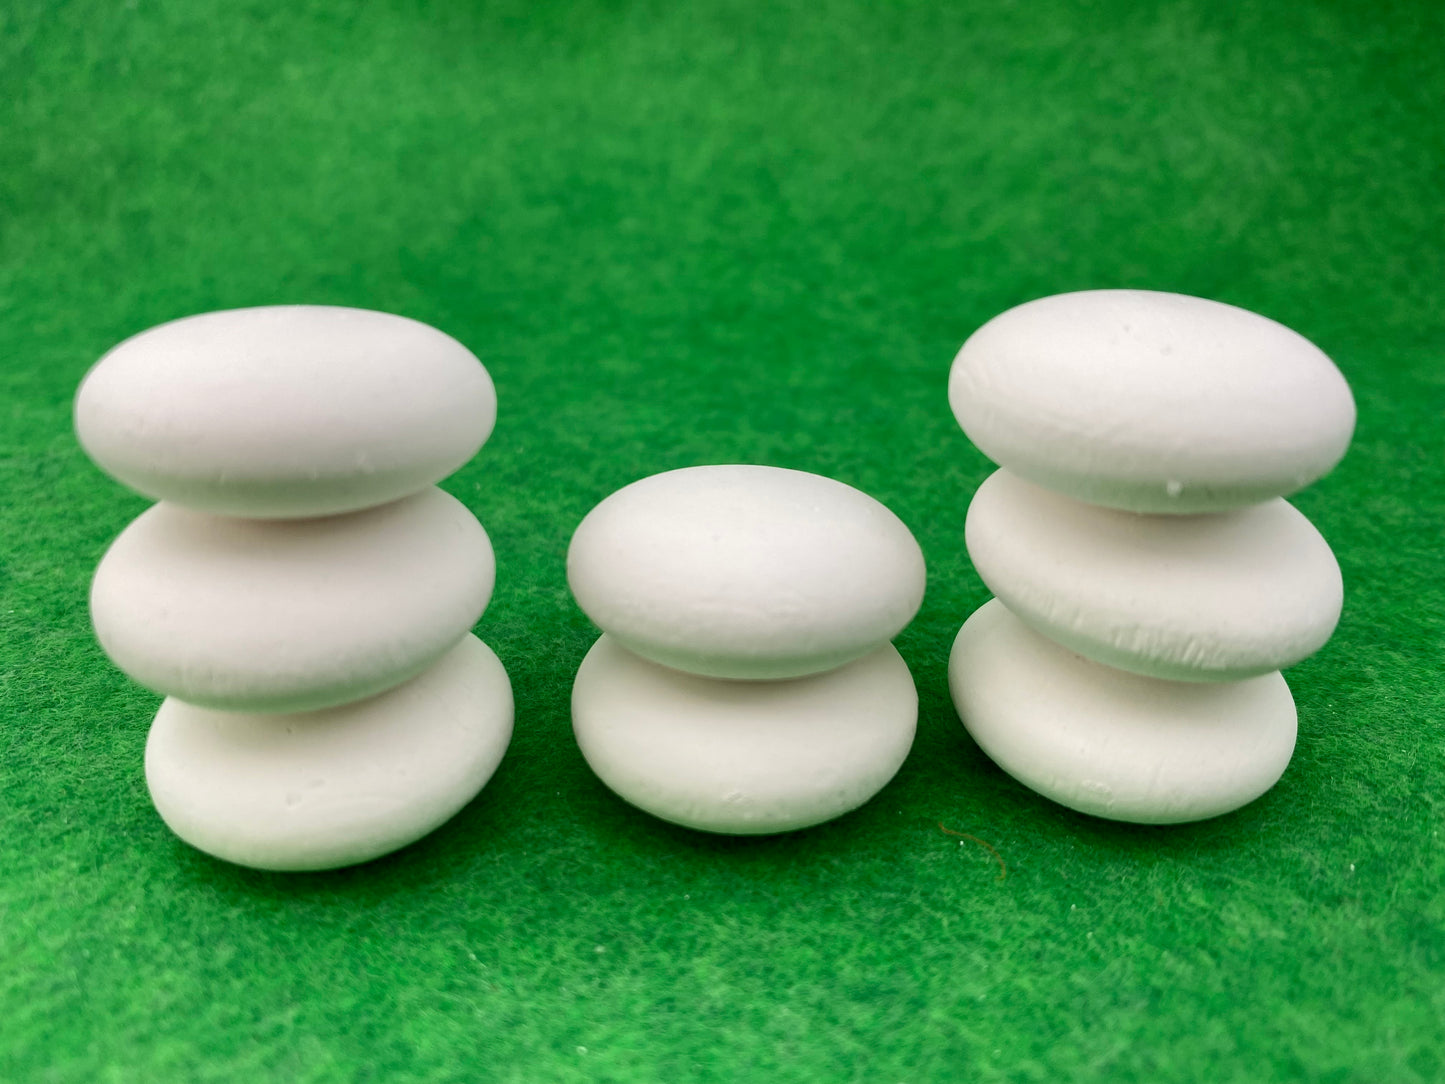 8 tiny white circular plaster pebbles stacked on top of each other